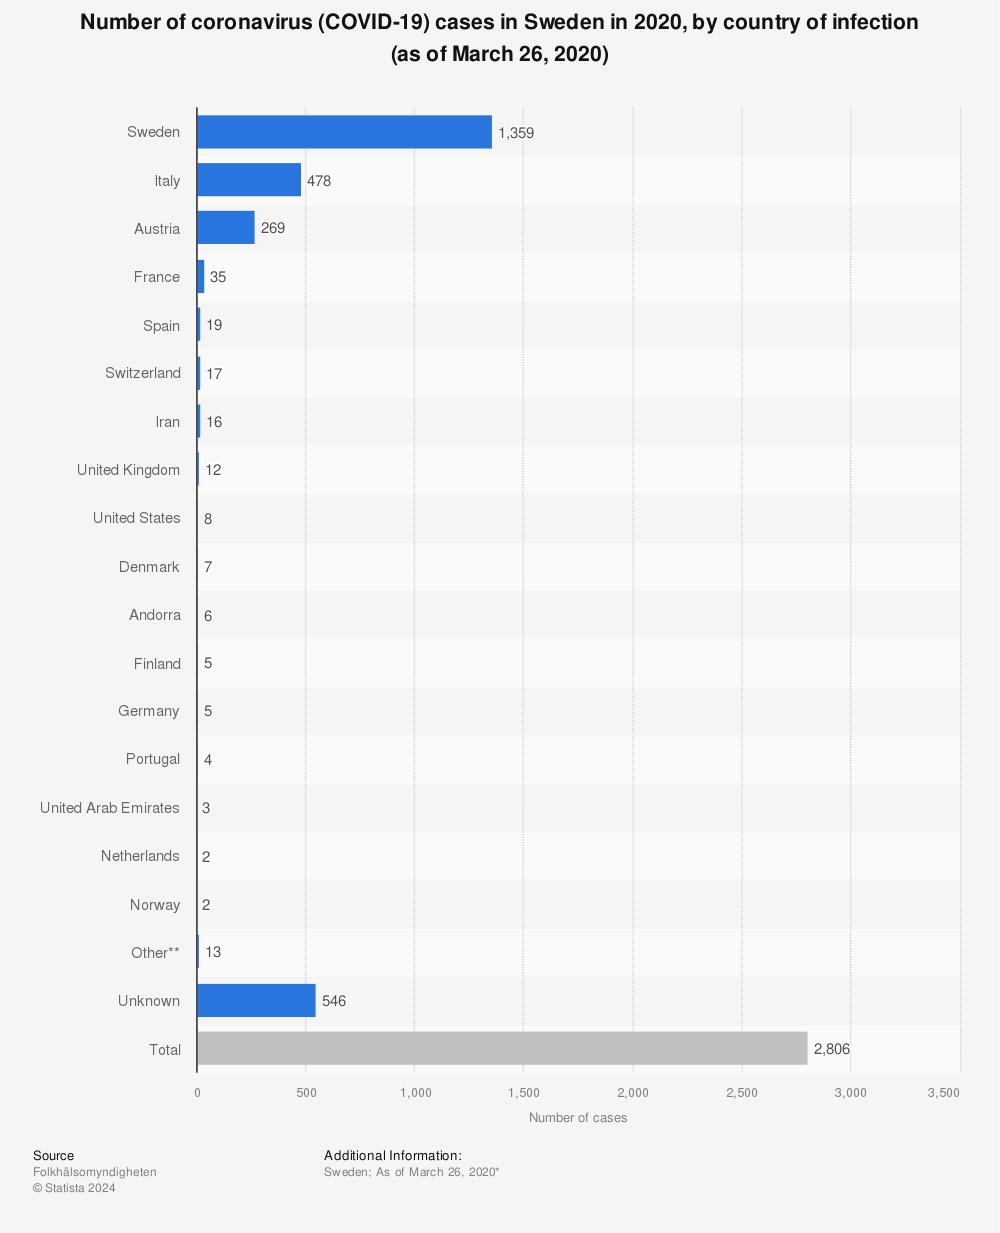 Statistic: Number of coronavirus (COVID-19) cases in Sweden in 2020, by country of infection (as of March 26, 2020) | Statista